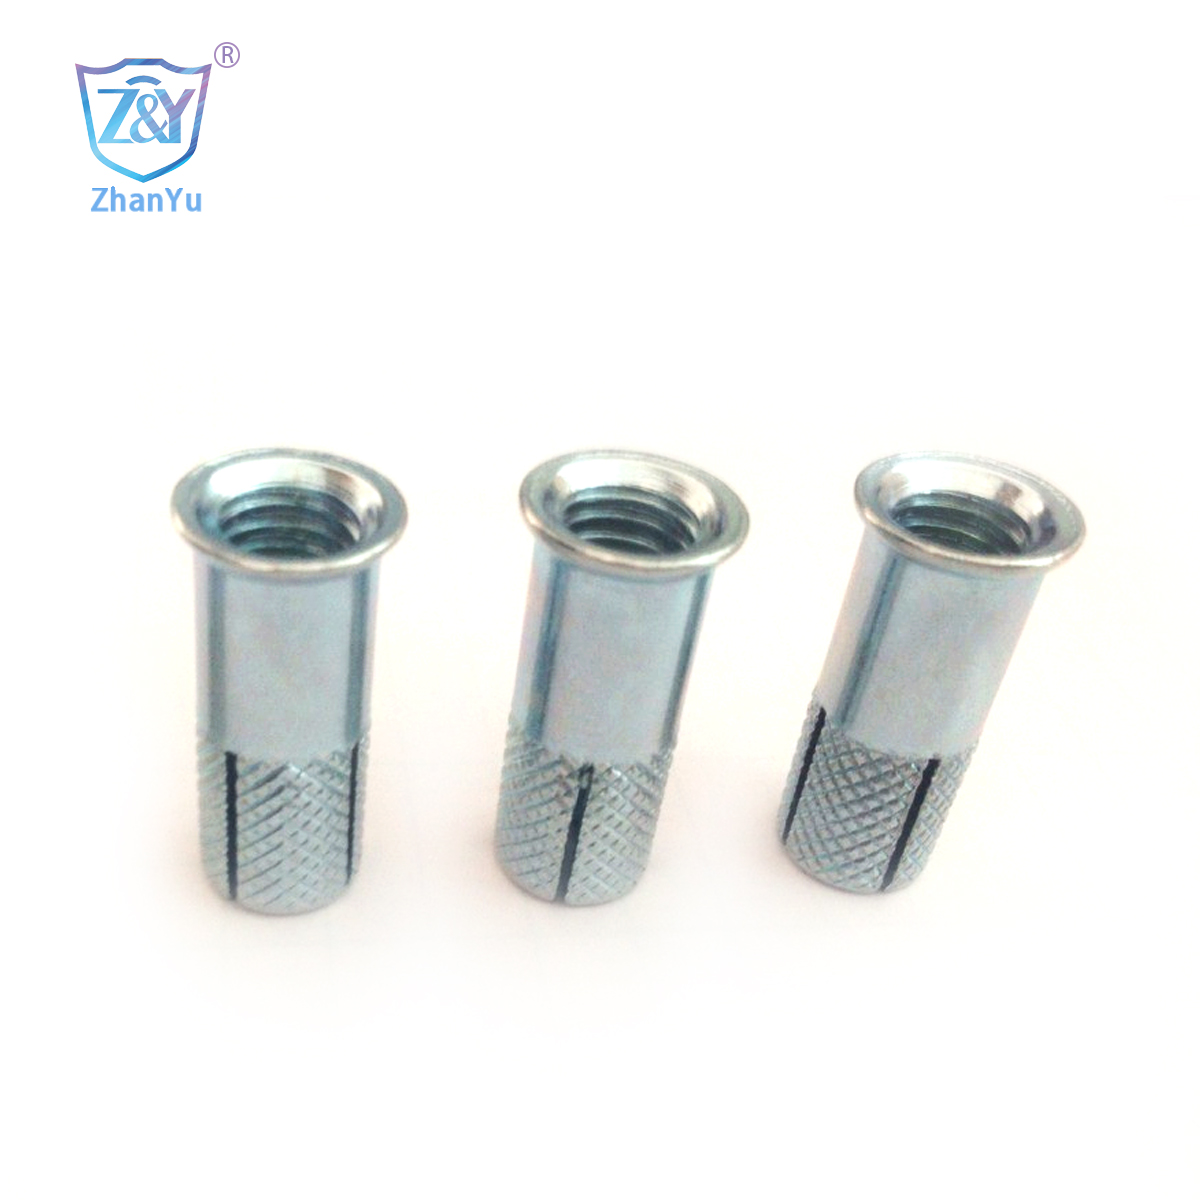 China wholesale Antiskid Shark Fin Anchor Pricelist –  Flange Drop in Anchor Professional Drop in Anchor Imperial Galvanized Direct Factory Quality Assurance – Zhanyu